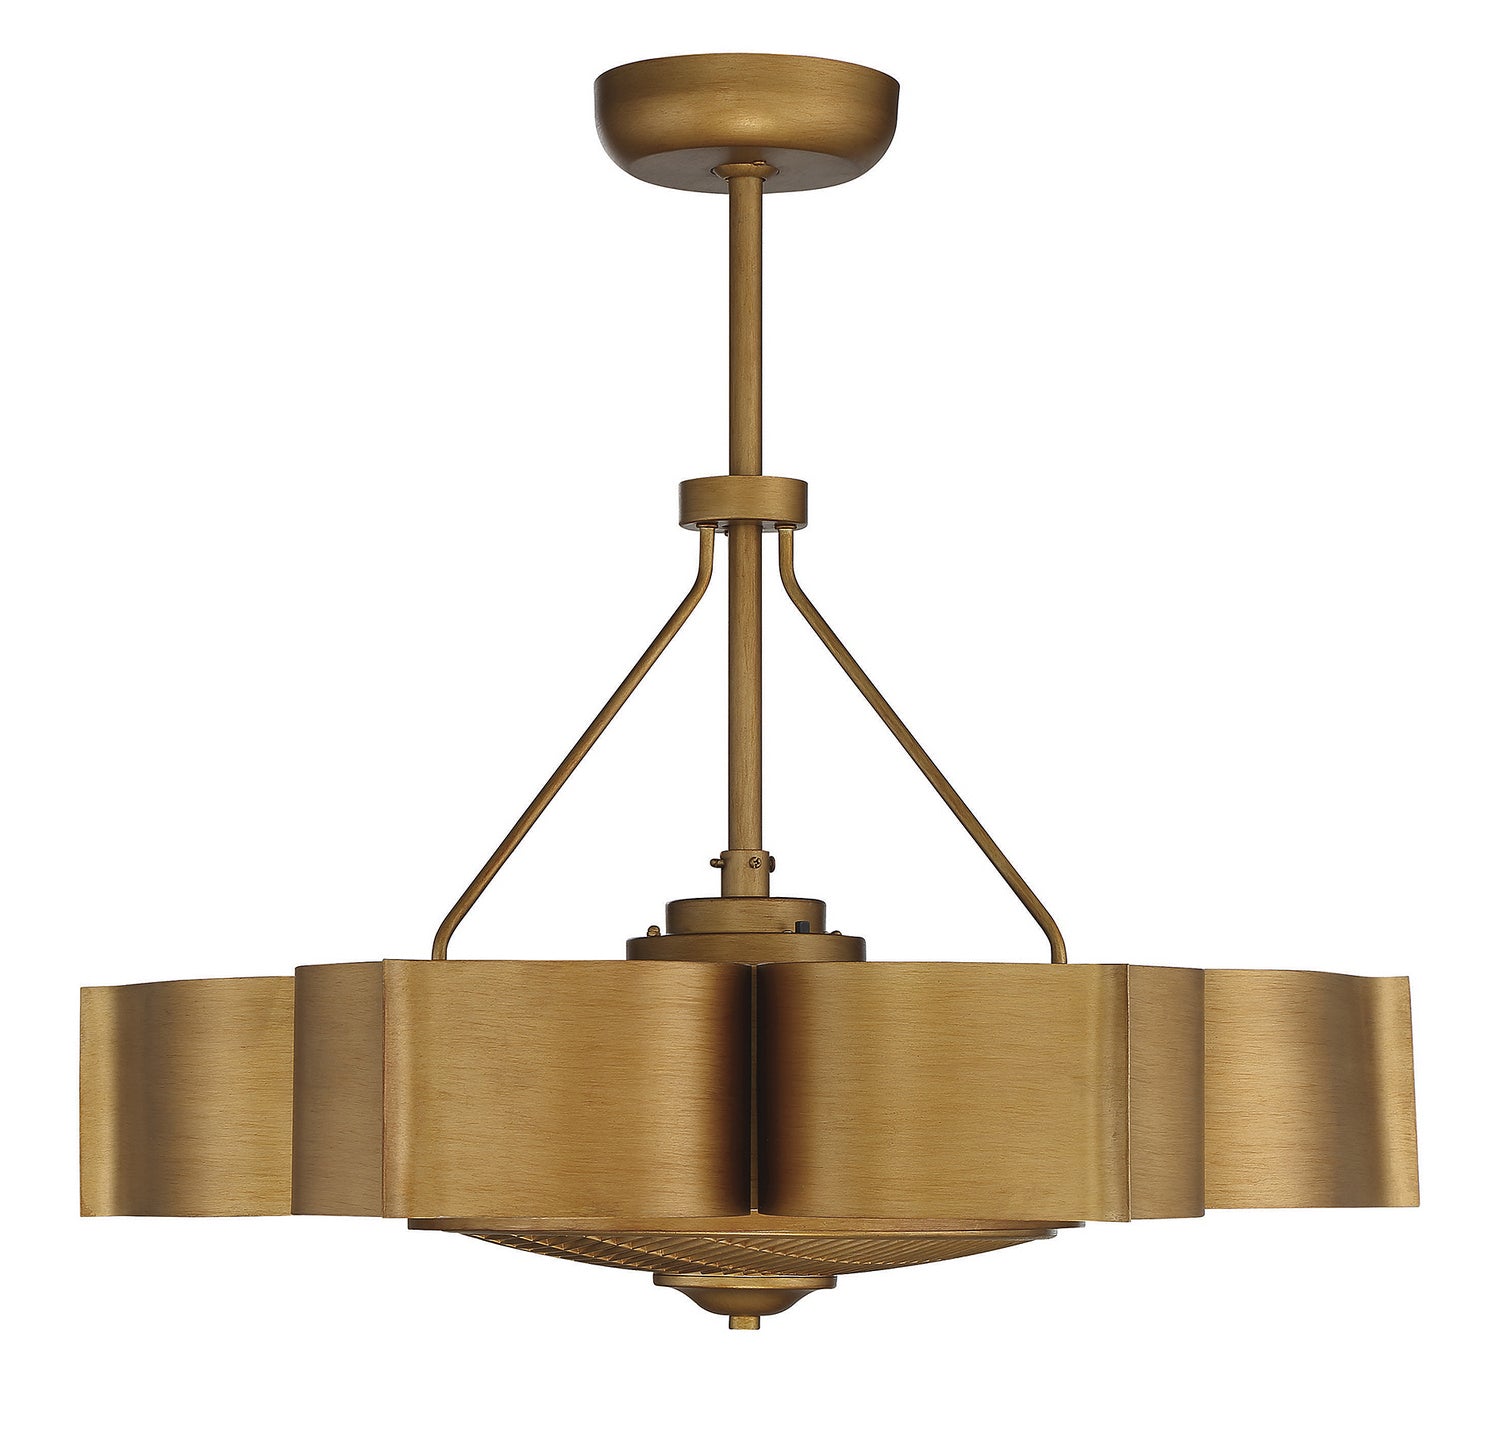 Savoy House Stockholm 39-FD-125-54 Ceiling Fan 12 - Gold Patina, Gold/